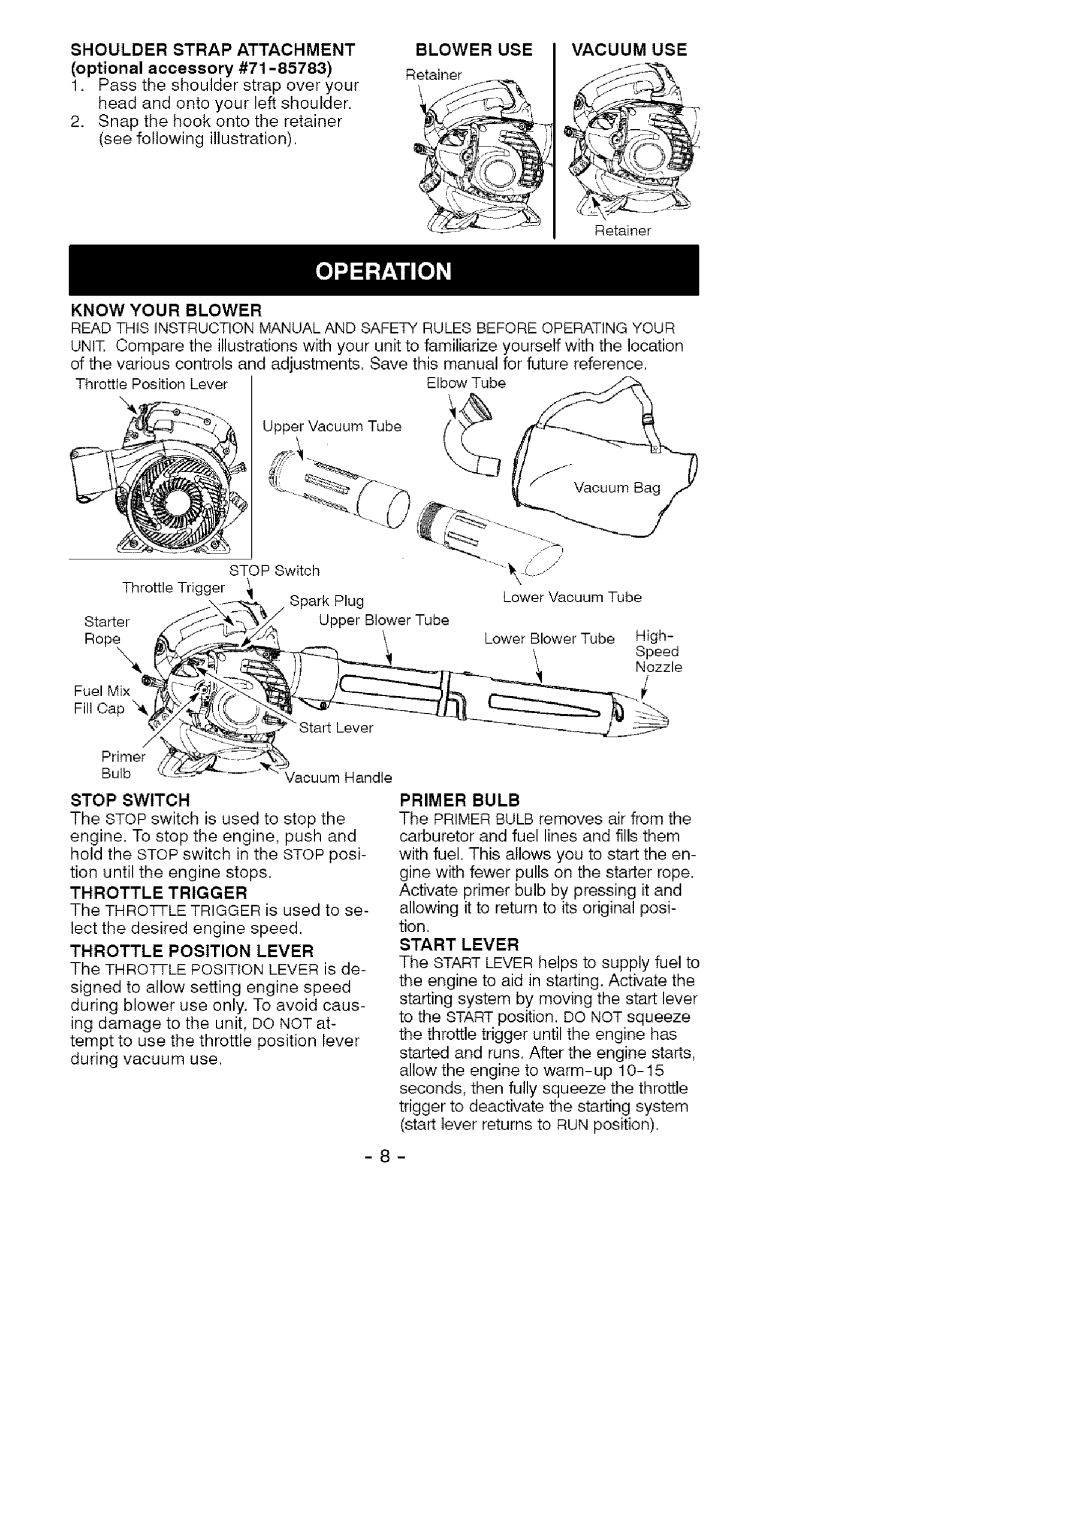 Craftsman 358.79476 Blower Use I Vacuum Use, Know Your Blower, Throttle Trigger, Throttle Position Lever, Primer Bulb 